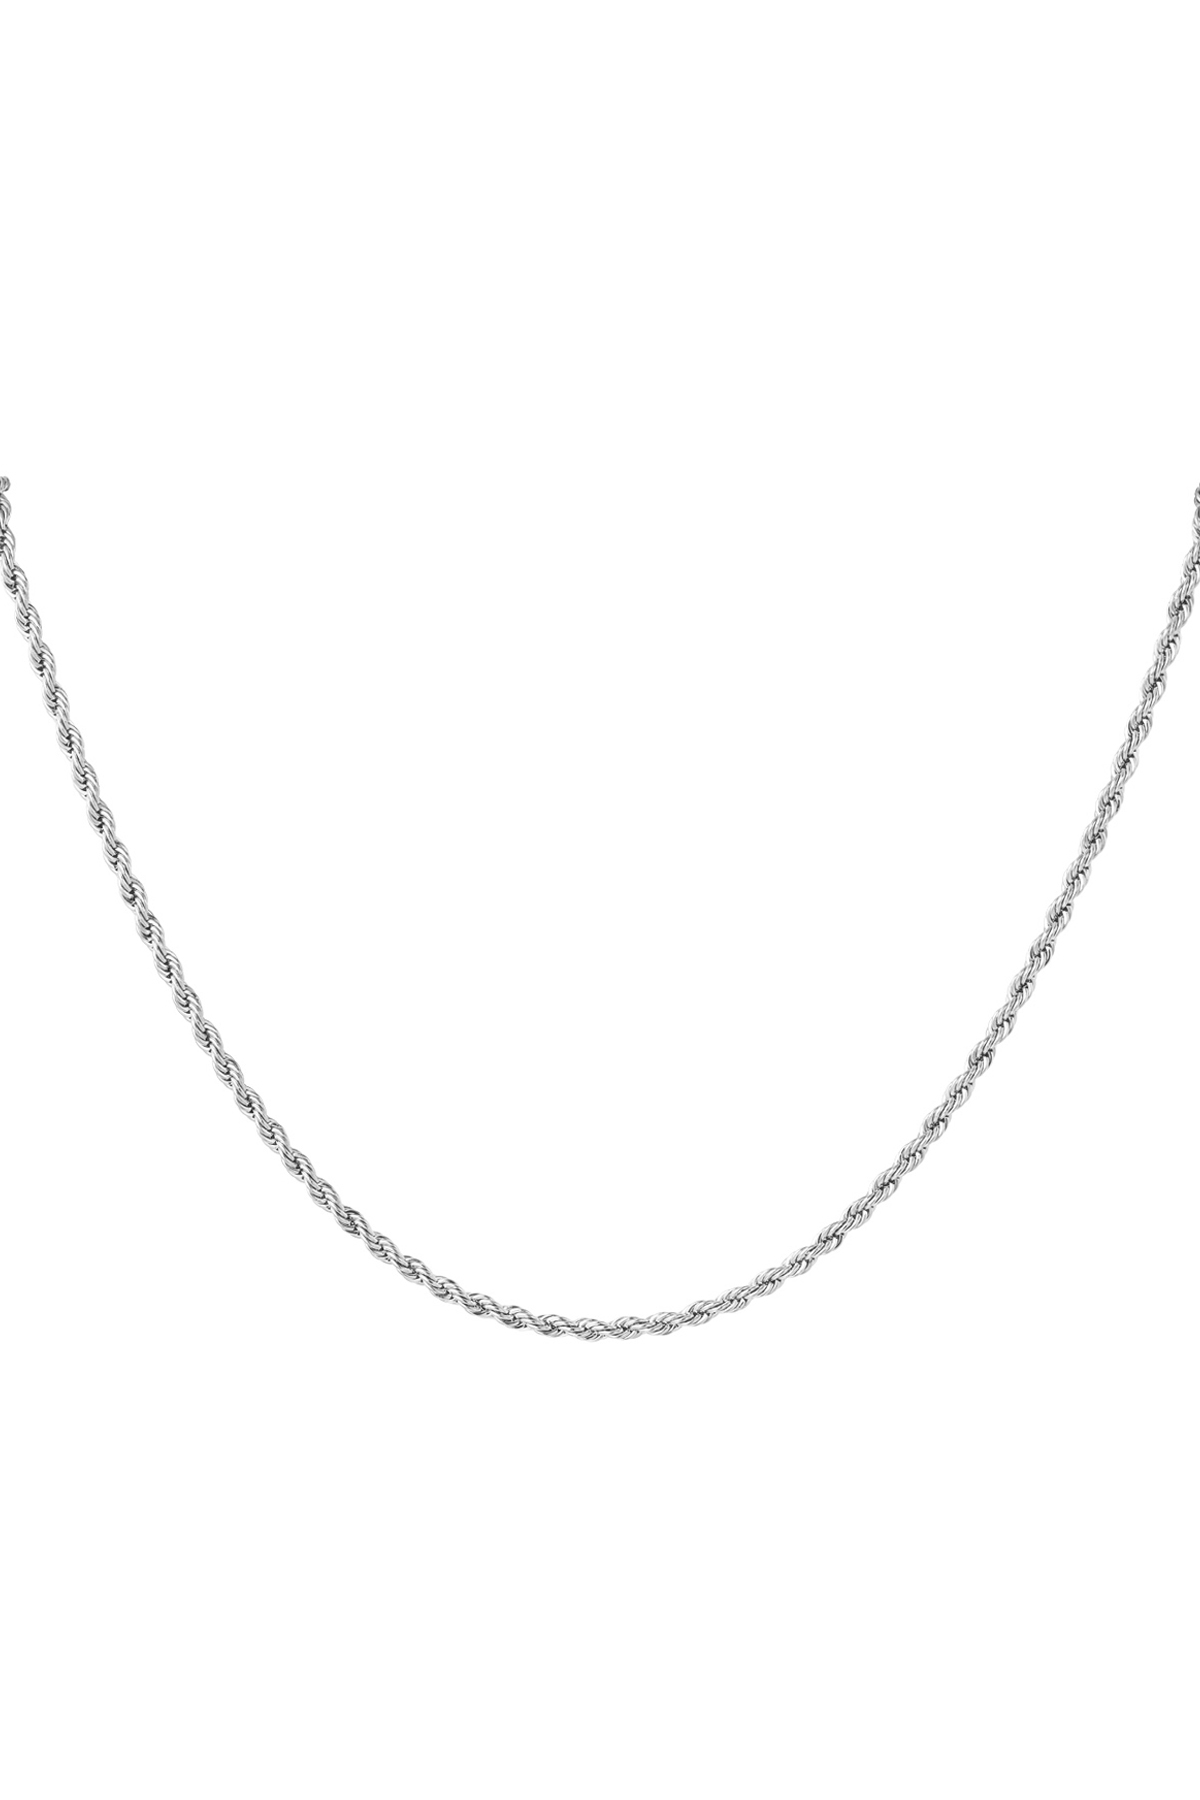 Unisex necklace twisted fine - silver-3.0MM h5 